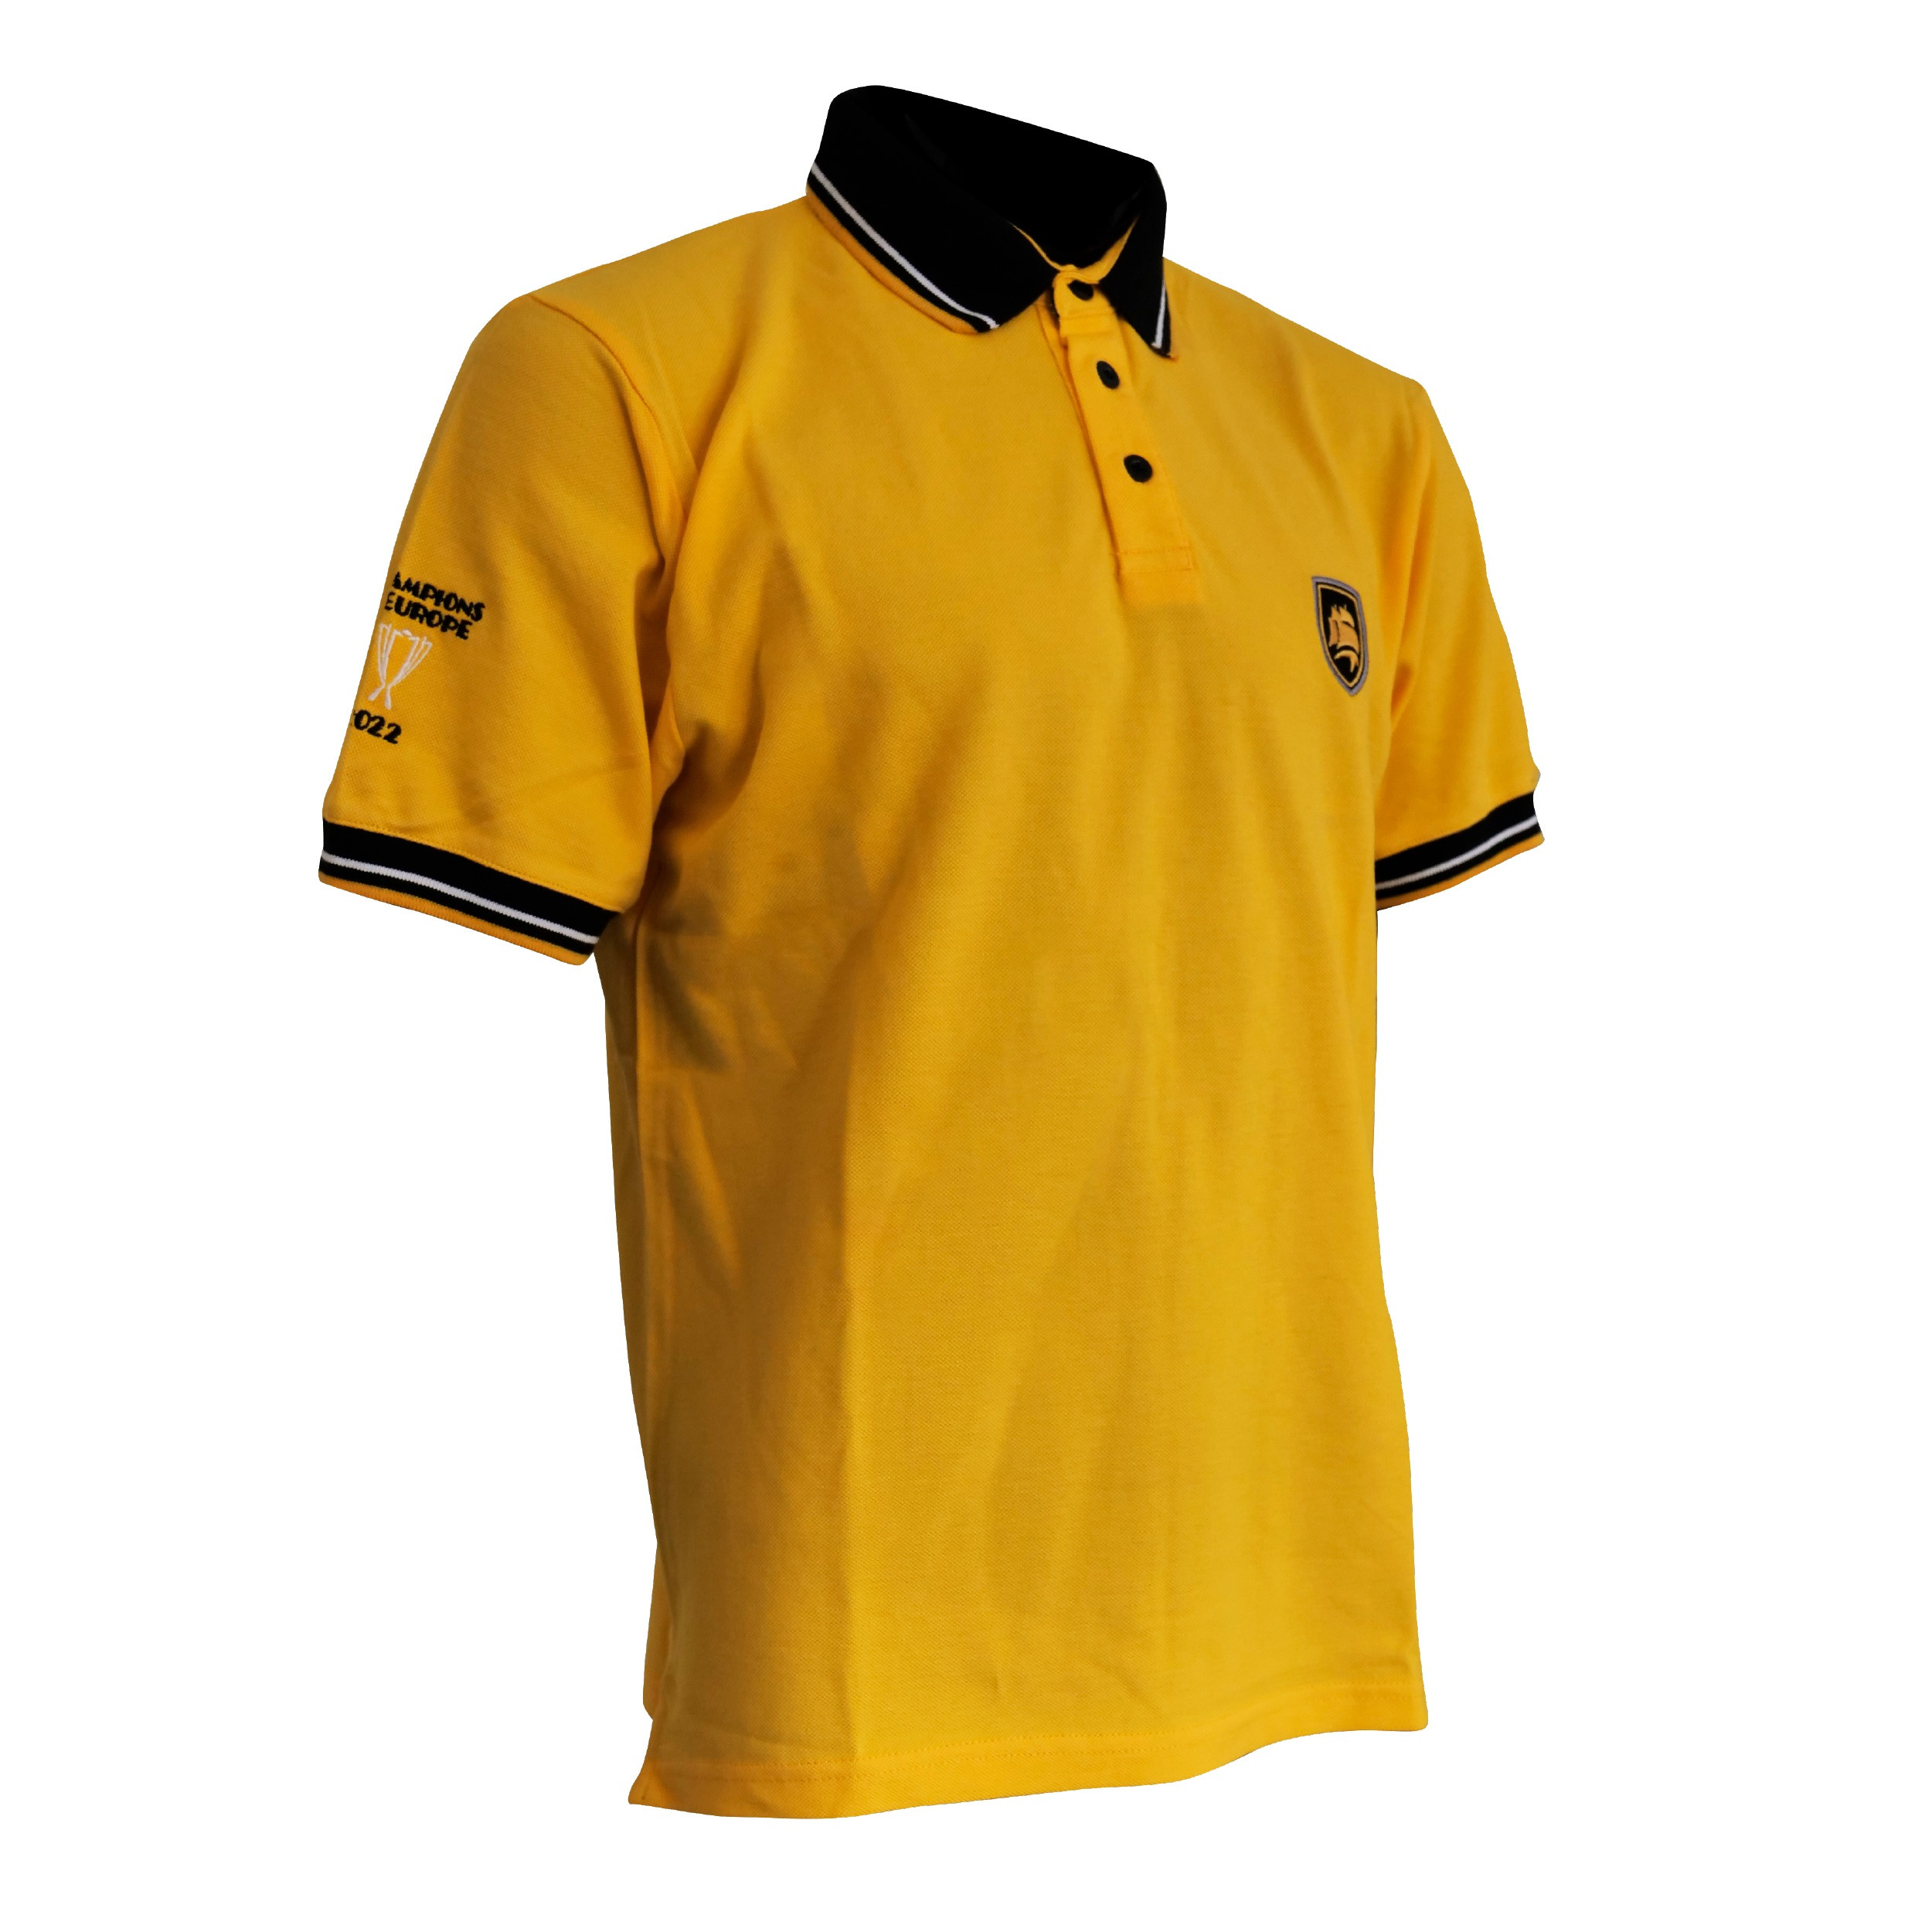 Polo jaune collection "Champion d'Europe" - Polos/ chemises - Homme - Mode